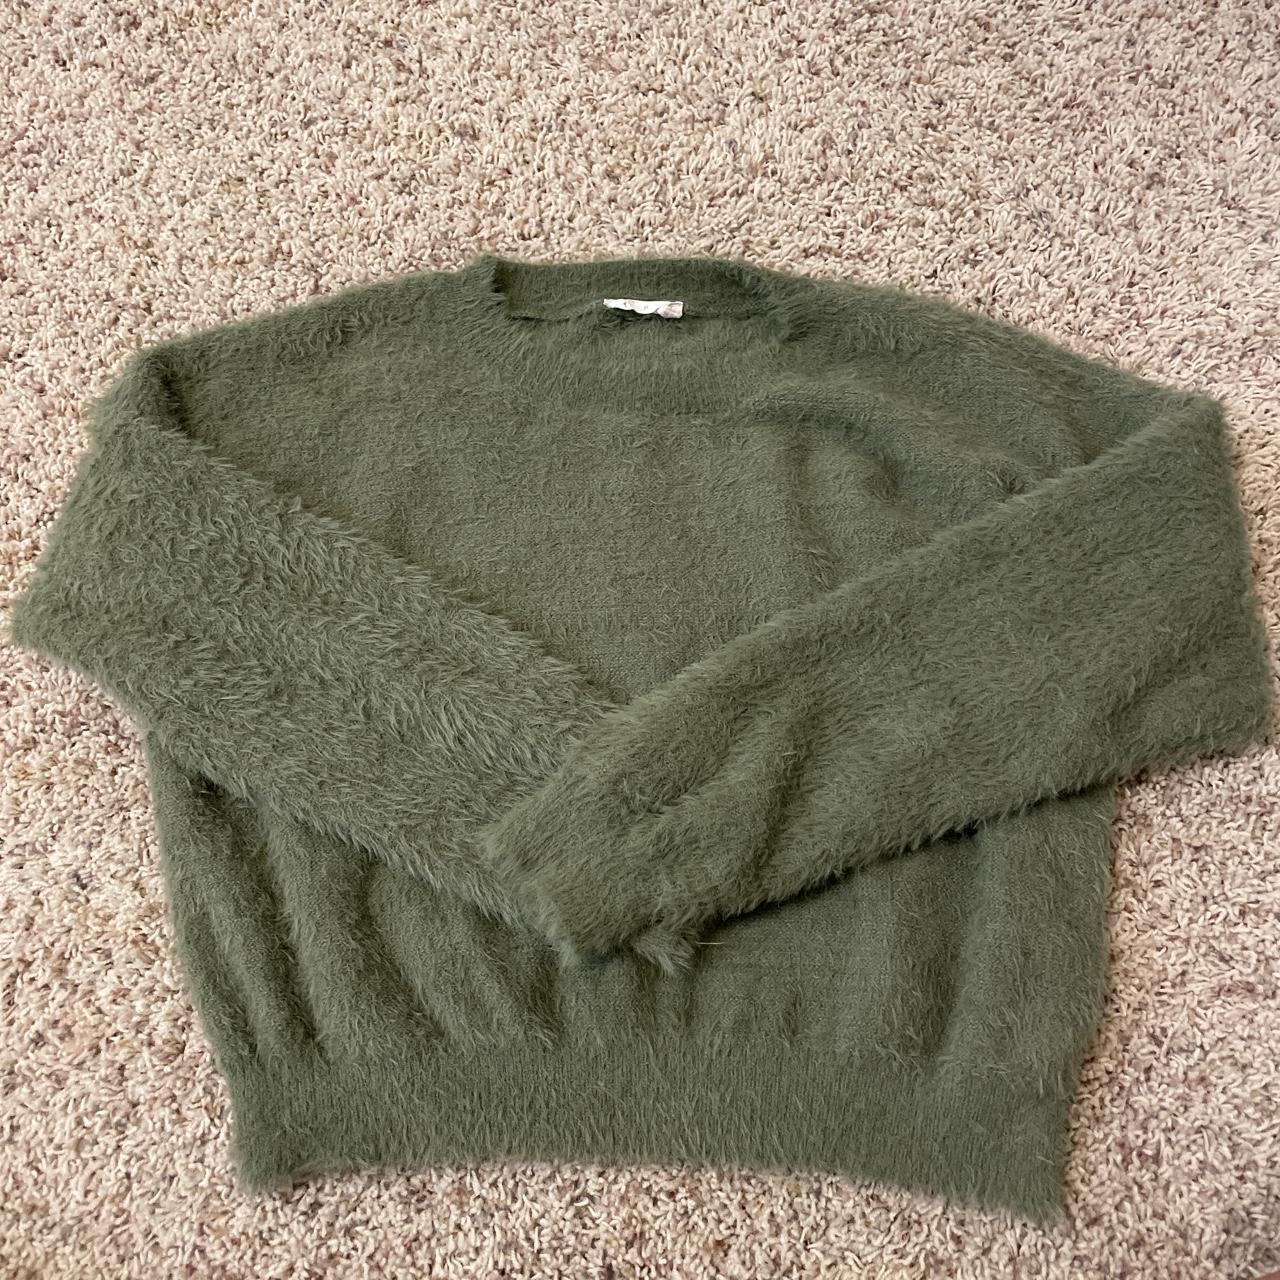 Fuzzy cropped green sweater- Altard state - Depop